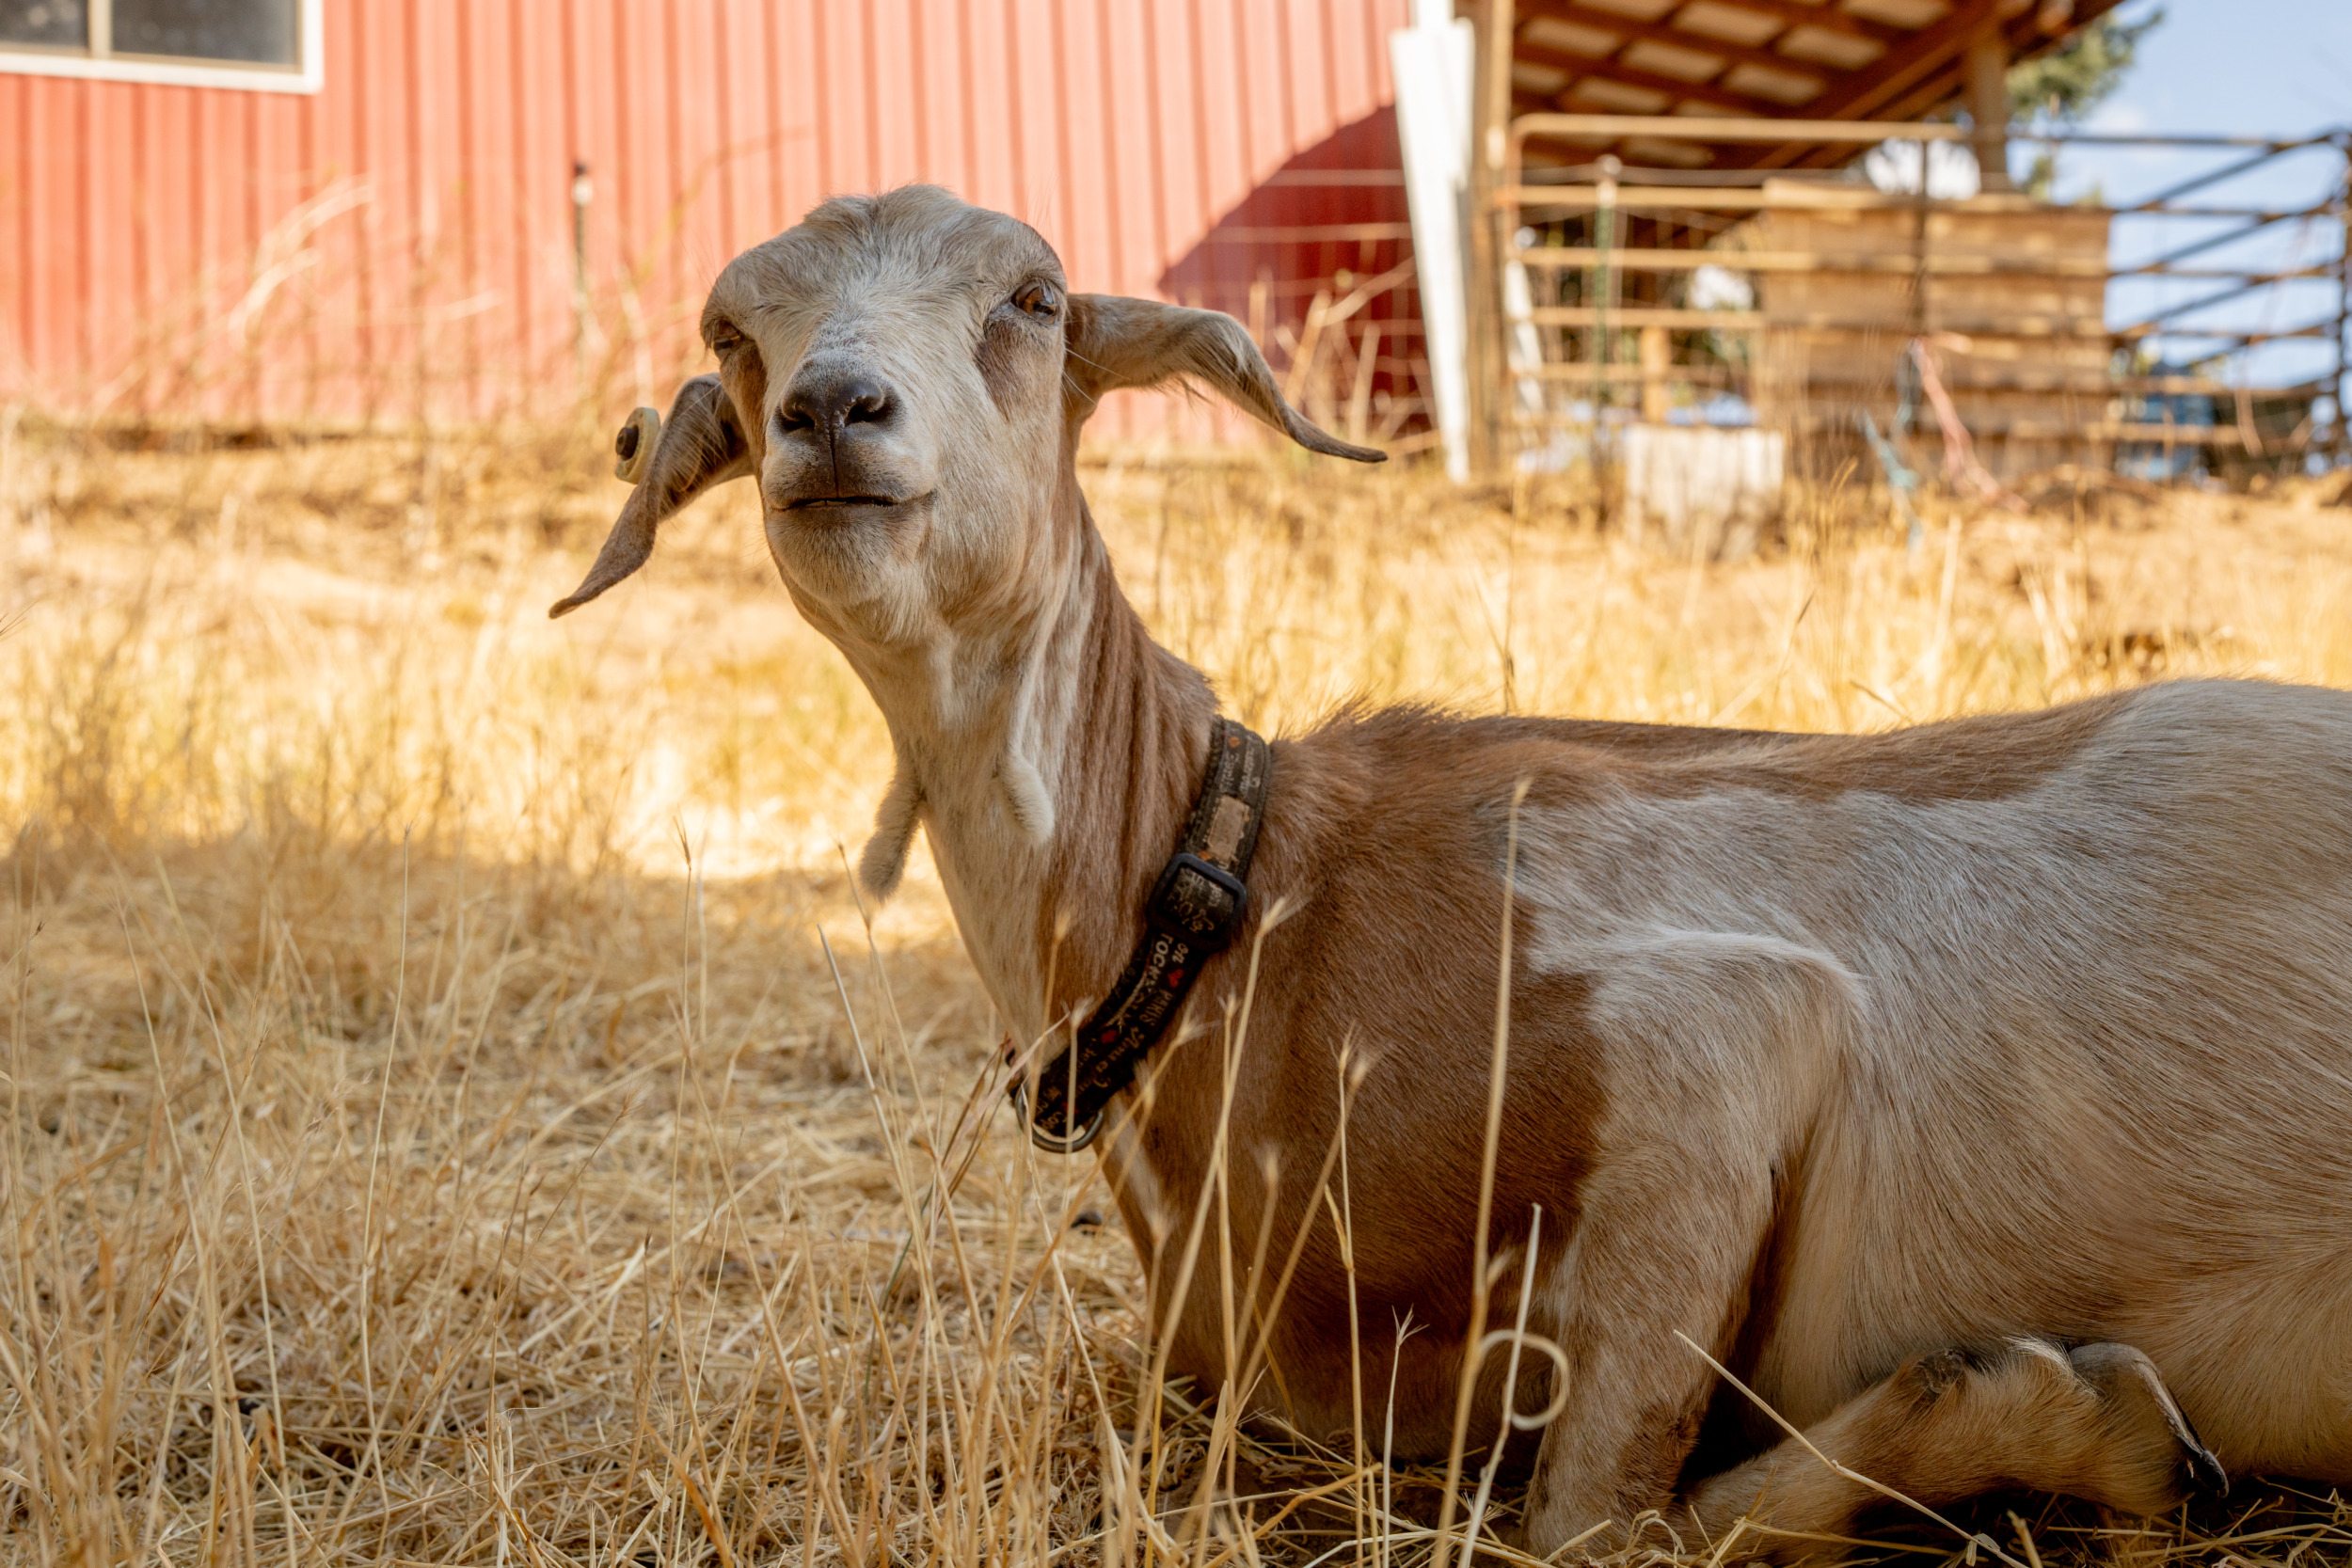 Goats - a tan and white goat wearing a collar